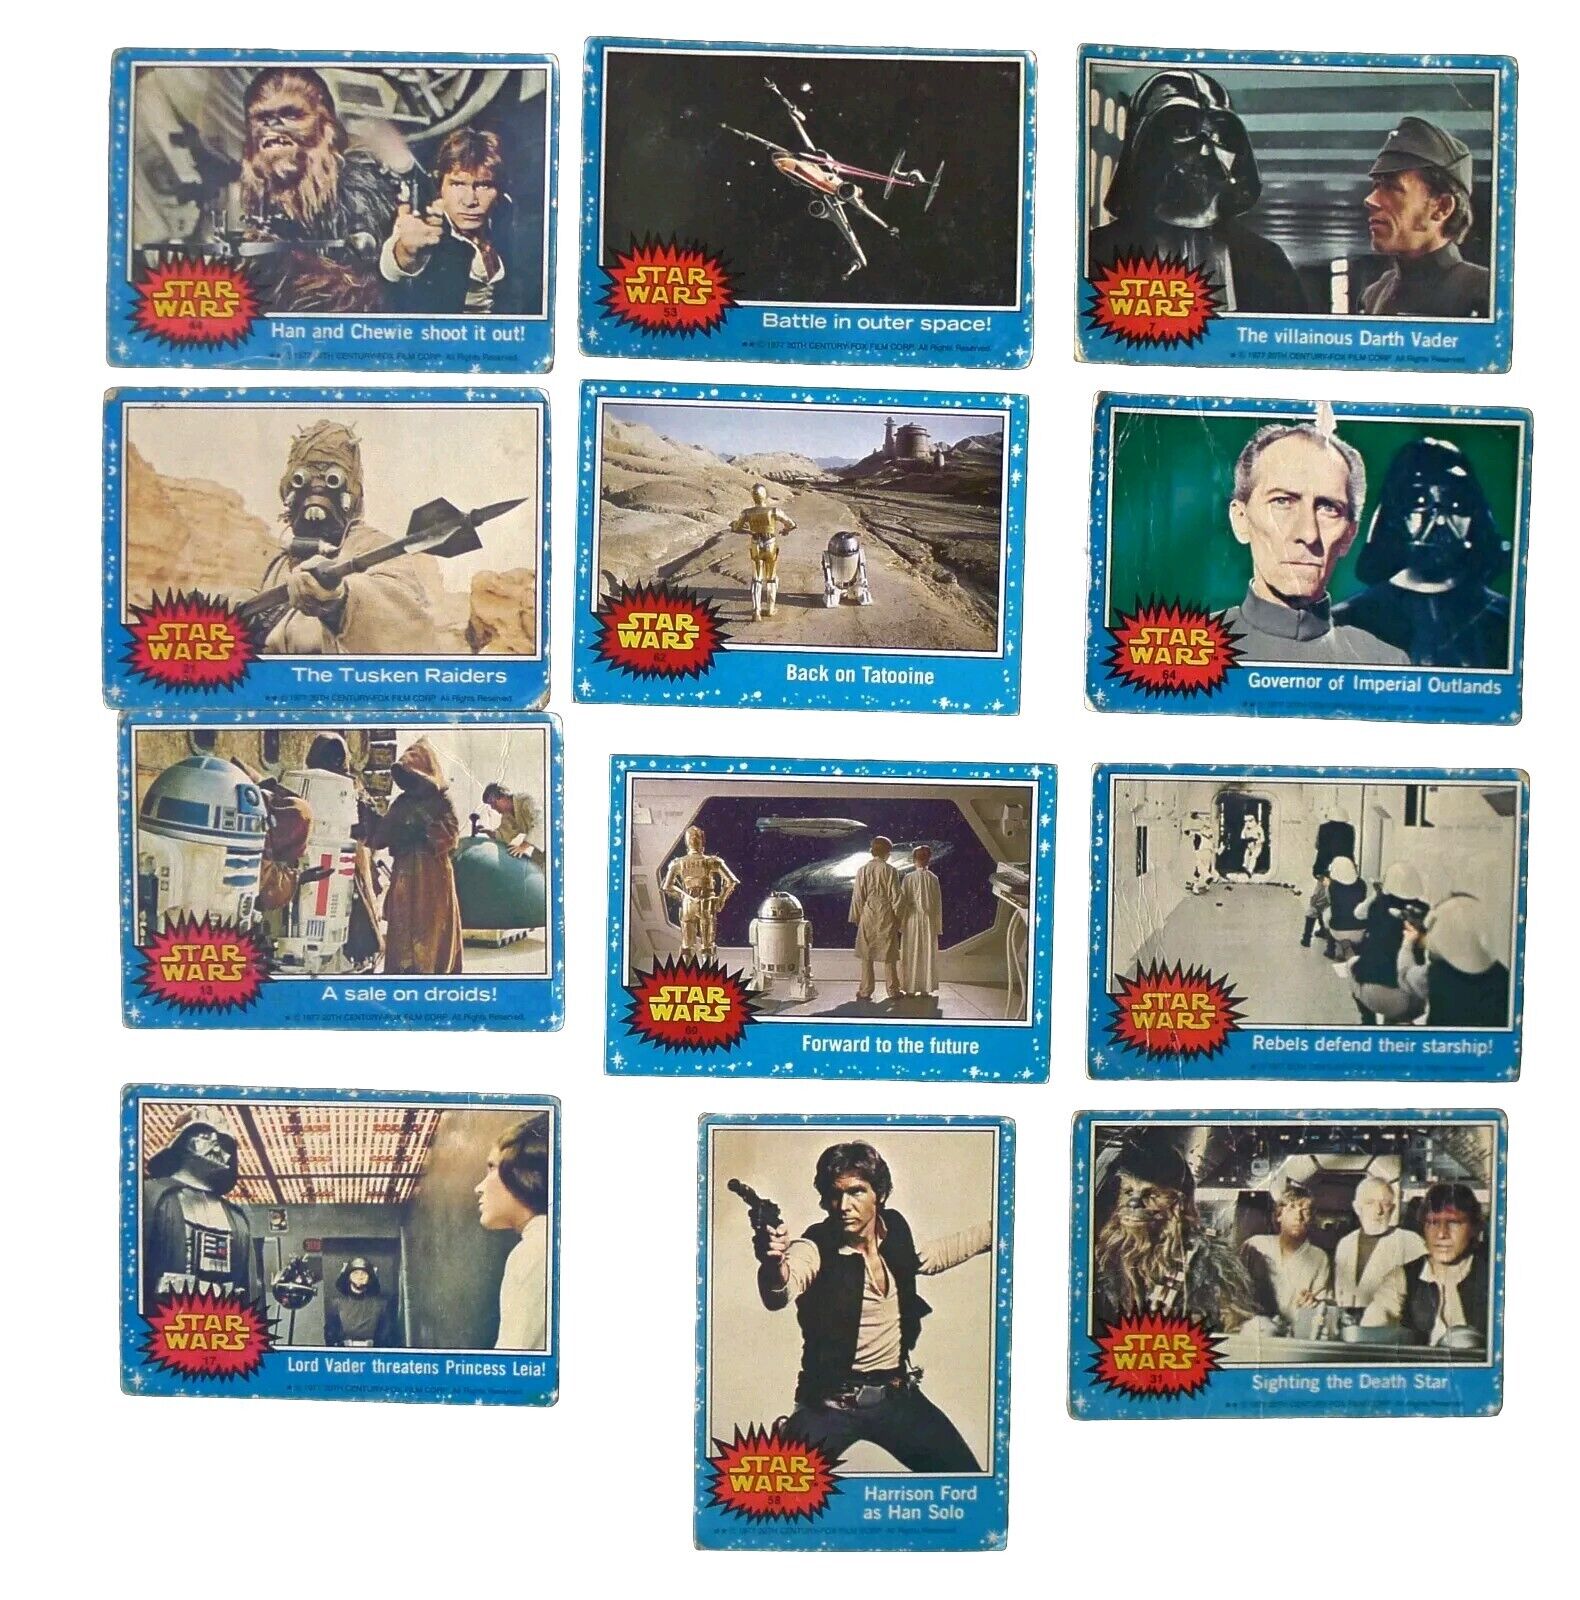 Star Wars 1977 Blue Cards. Topps.